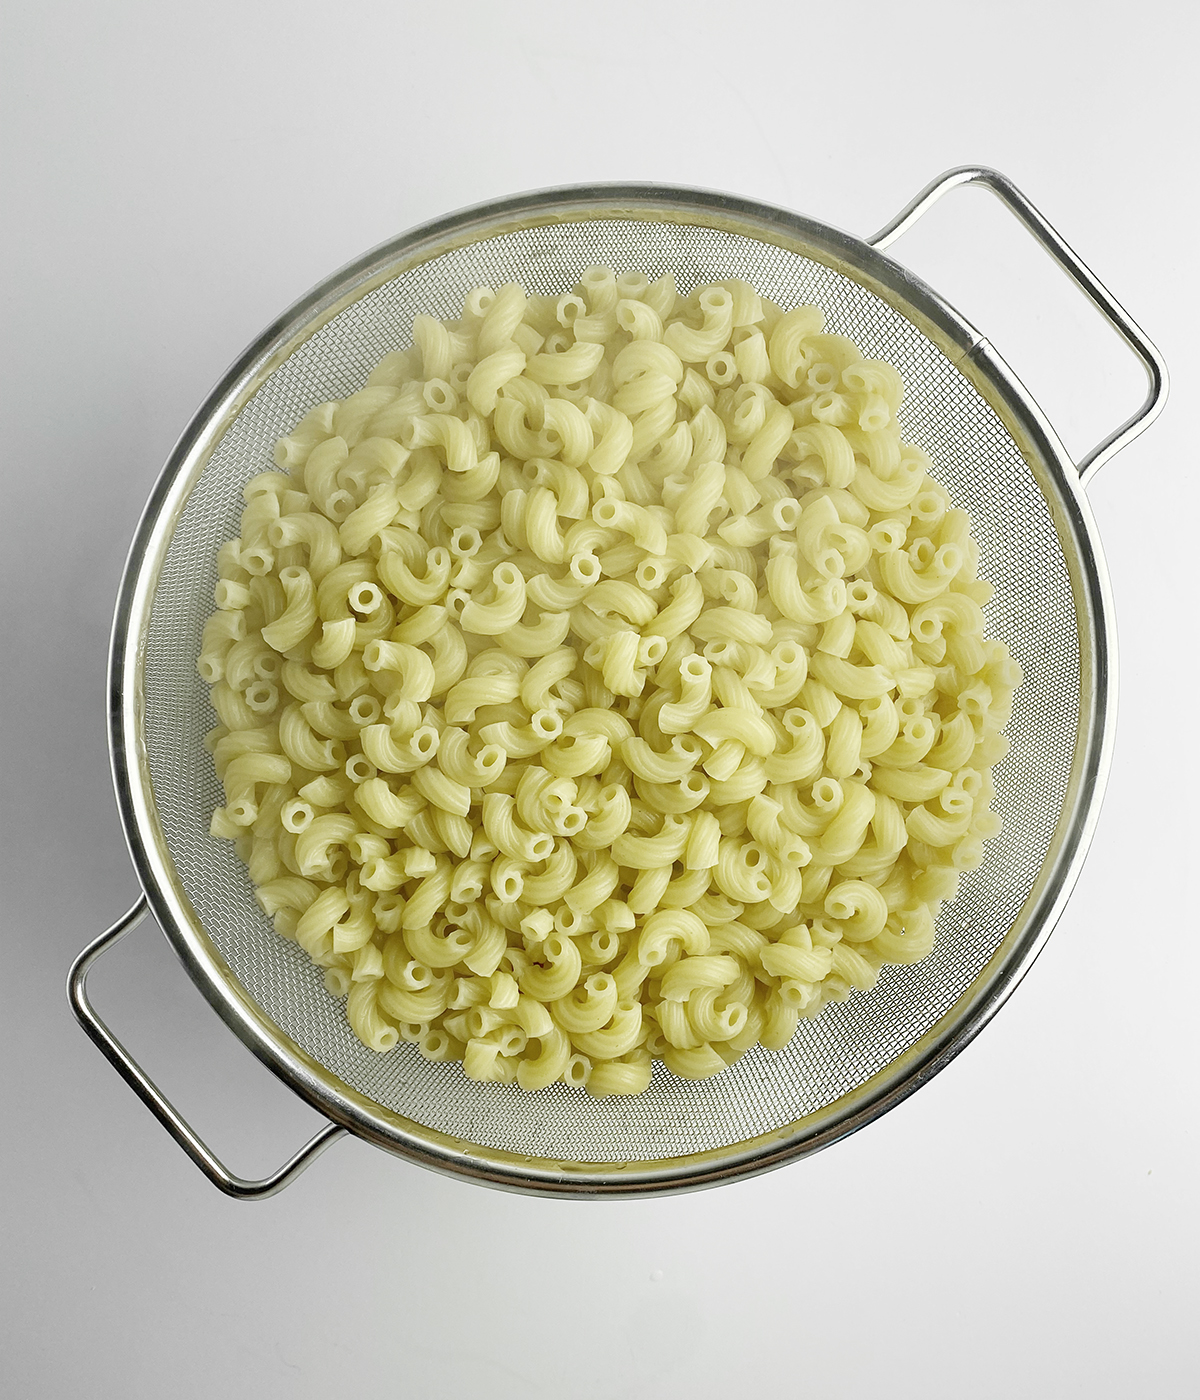 Elbow macaroni draining in a strainer.